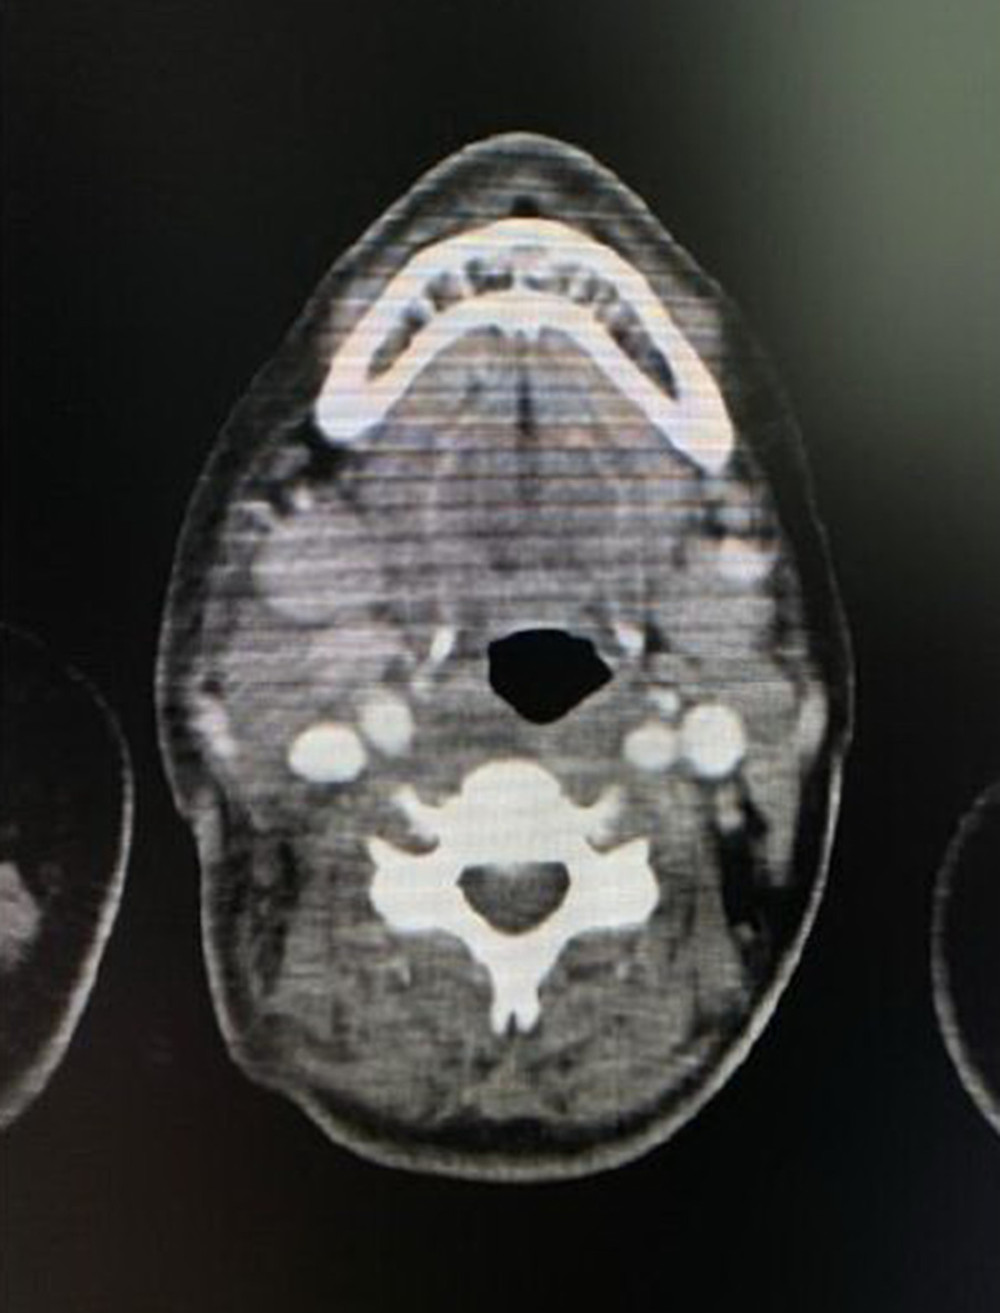 Axial section of CT neck showed right-sided multiple cervical lymph nodes; the largest was 2.8×2.3 cm.